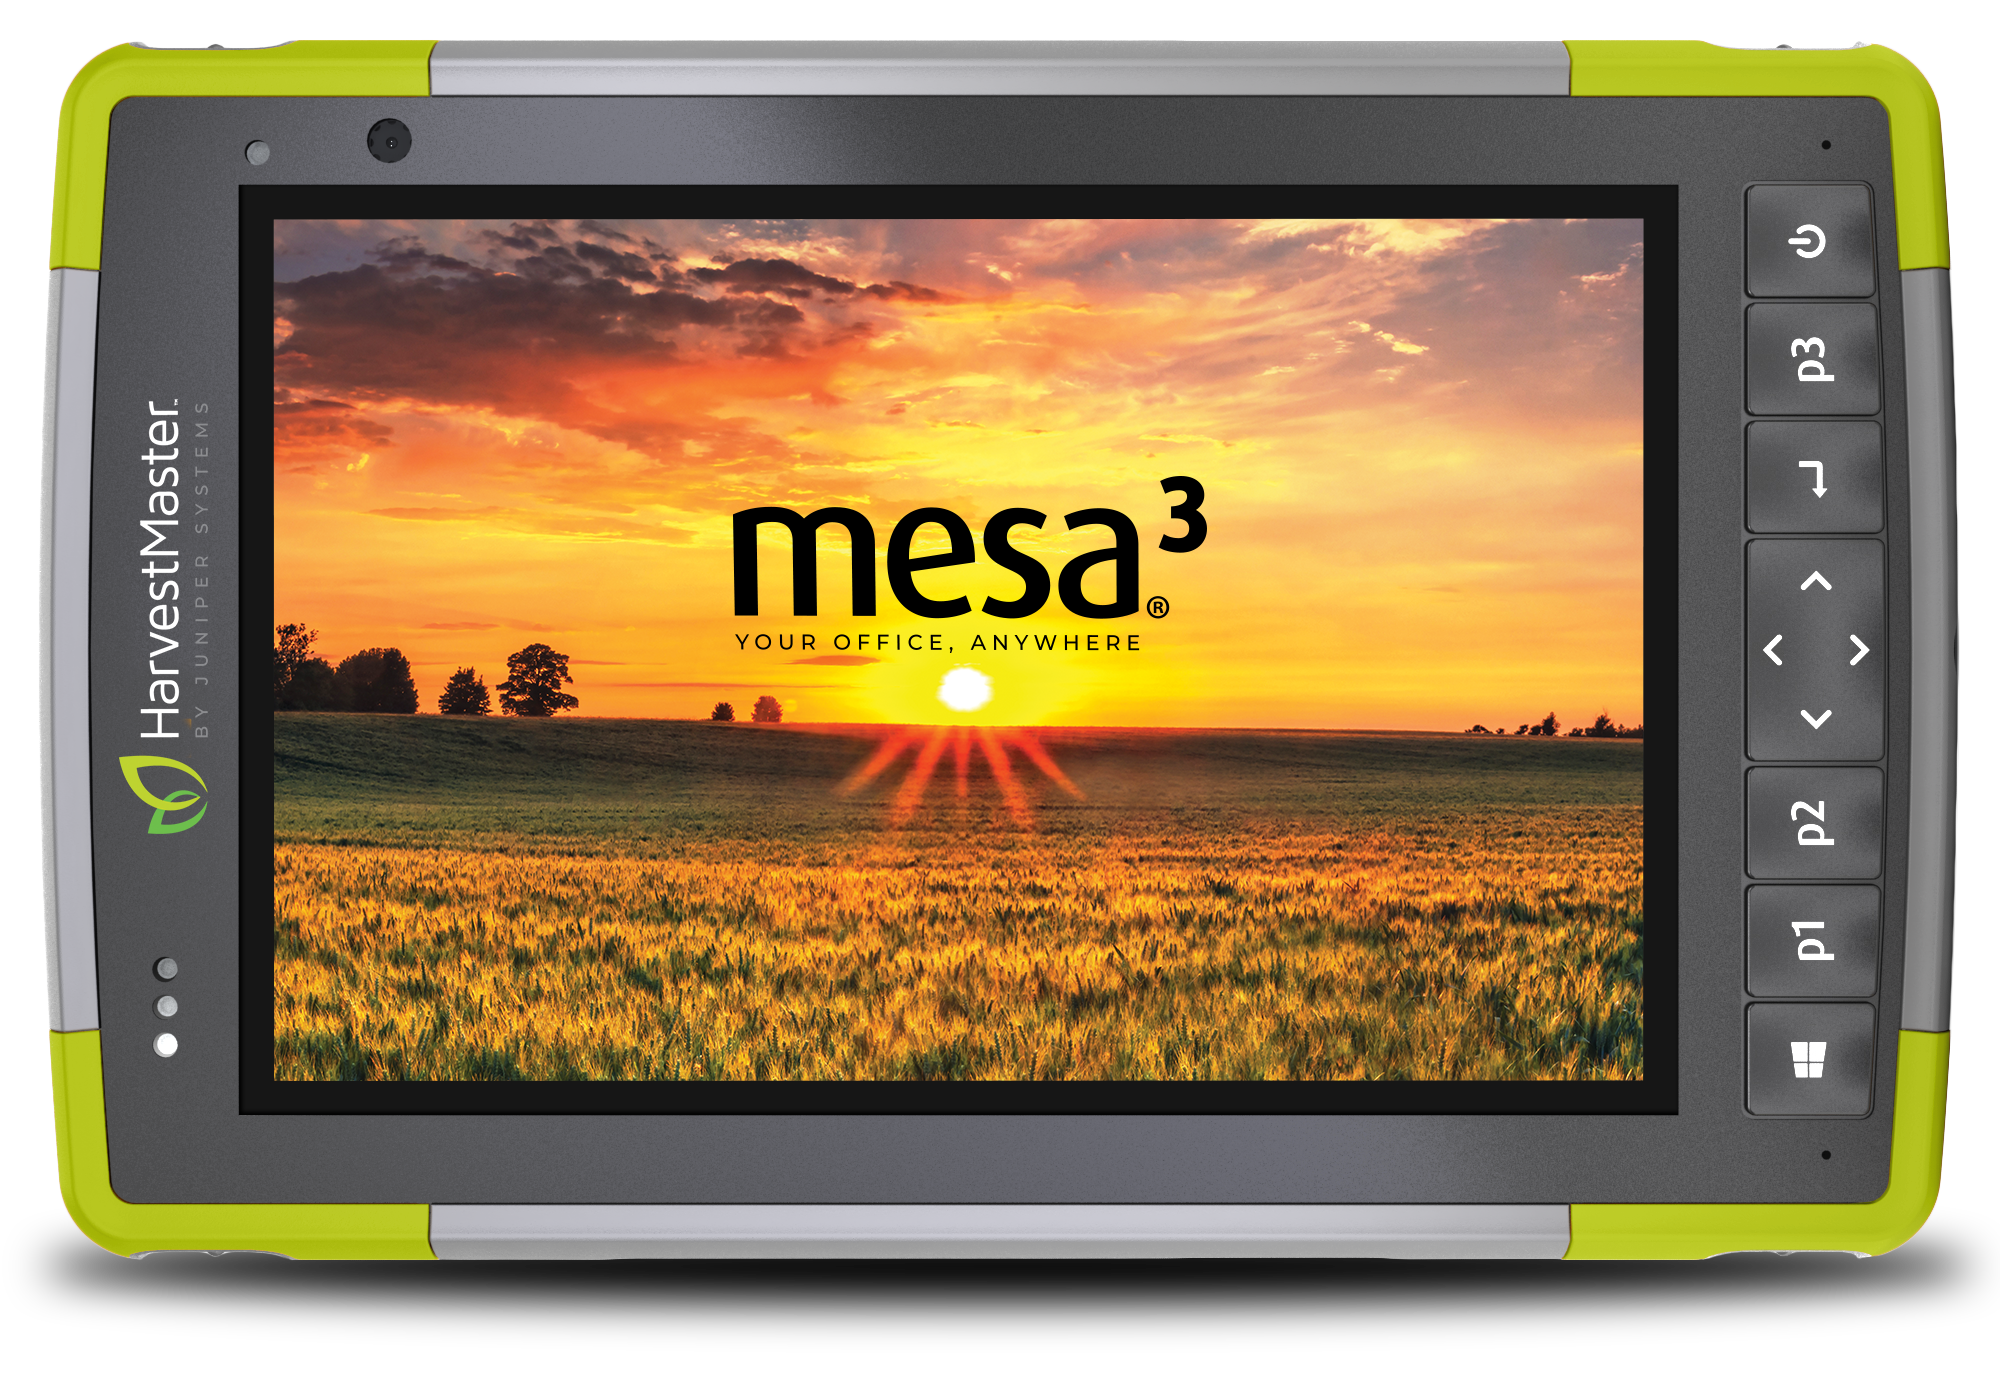 Image of the Mesa tablet showing Mirus software